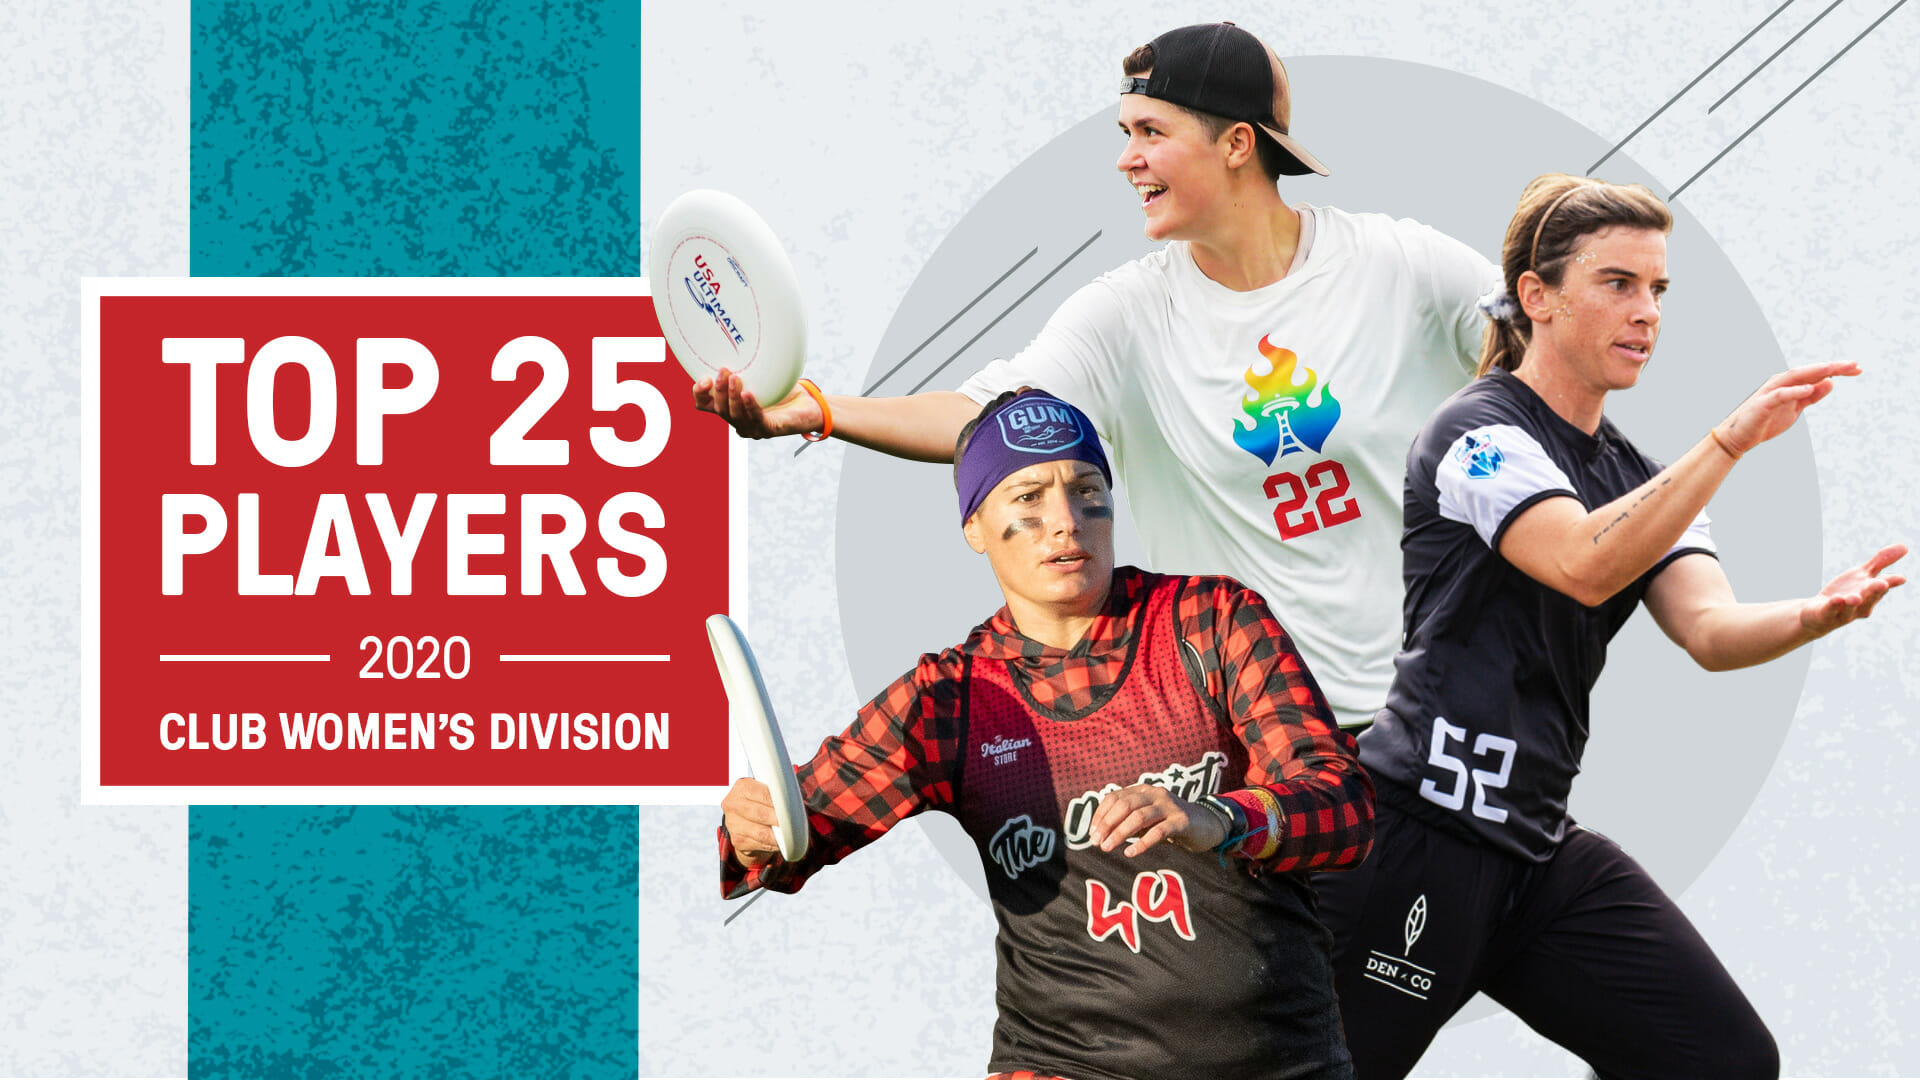 Top 25 Players 2020: Club Women's Division (Part 1: #1-10) - Ultiworld